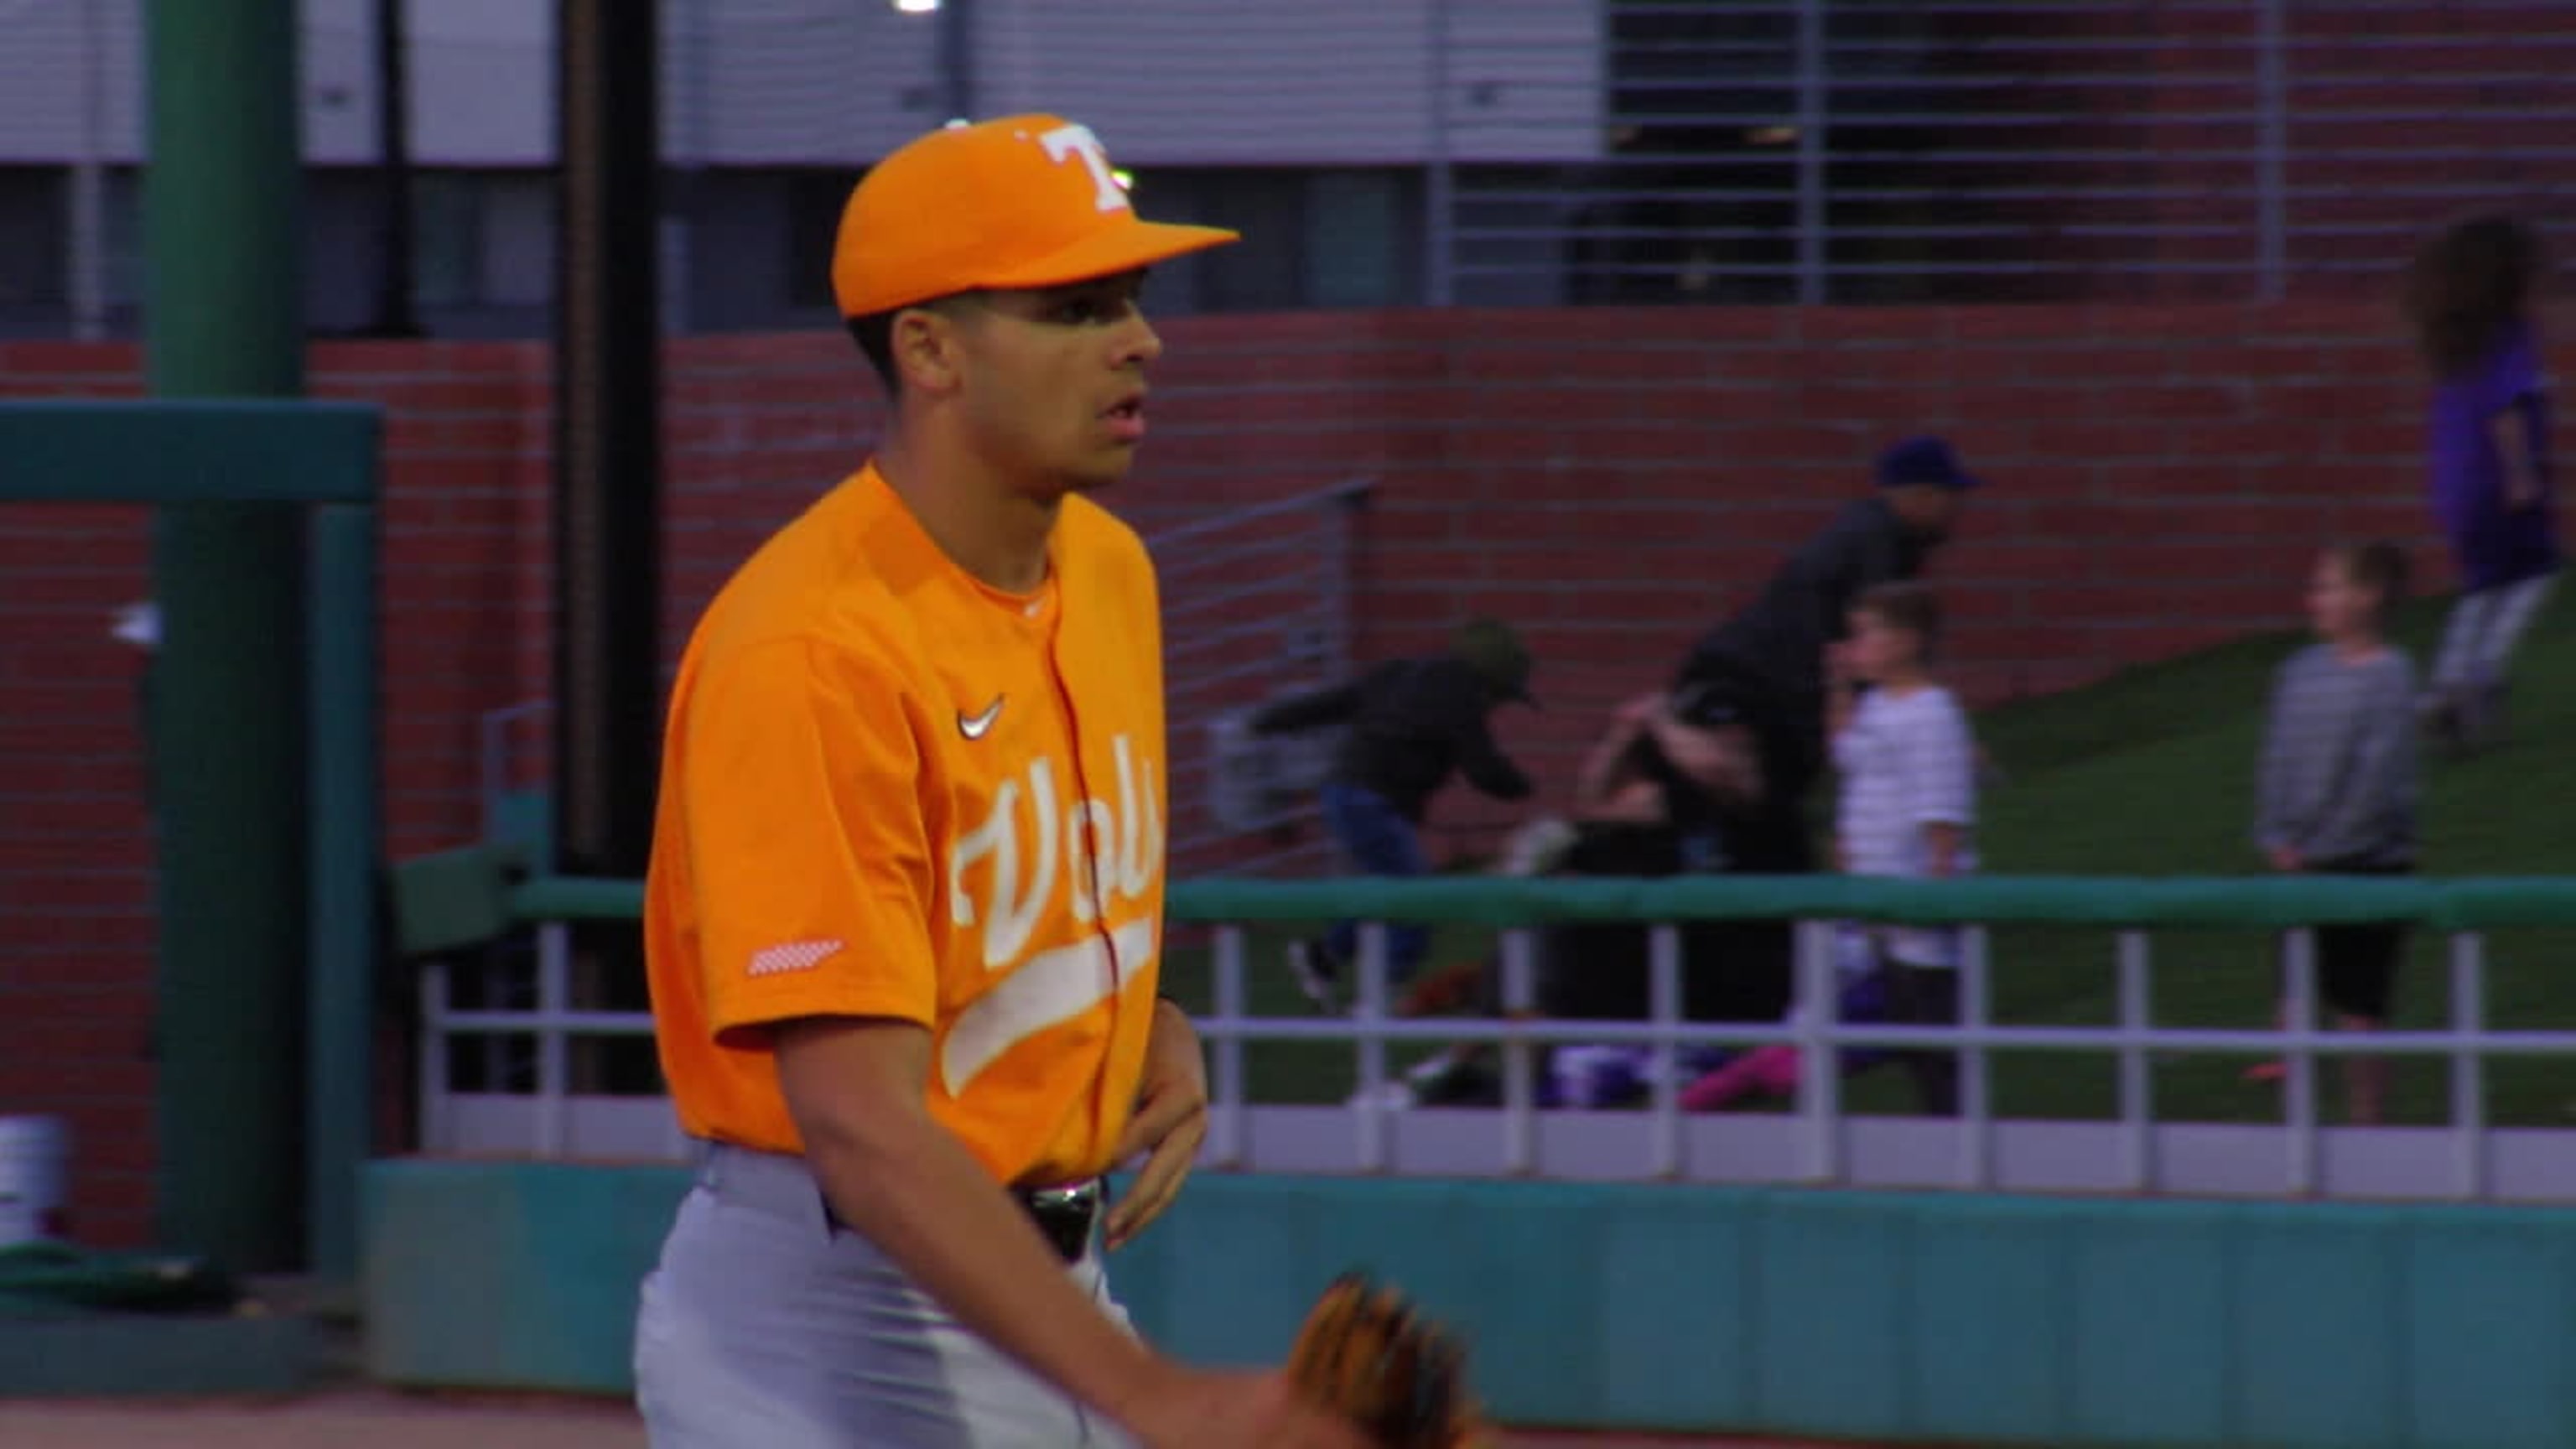 RHP Burns transferring from UT to Wake Forest, College